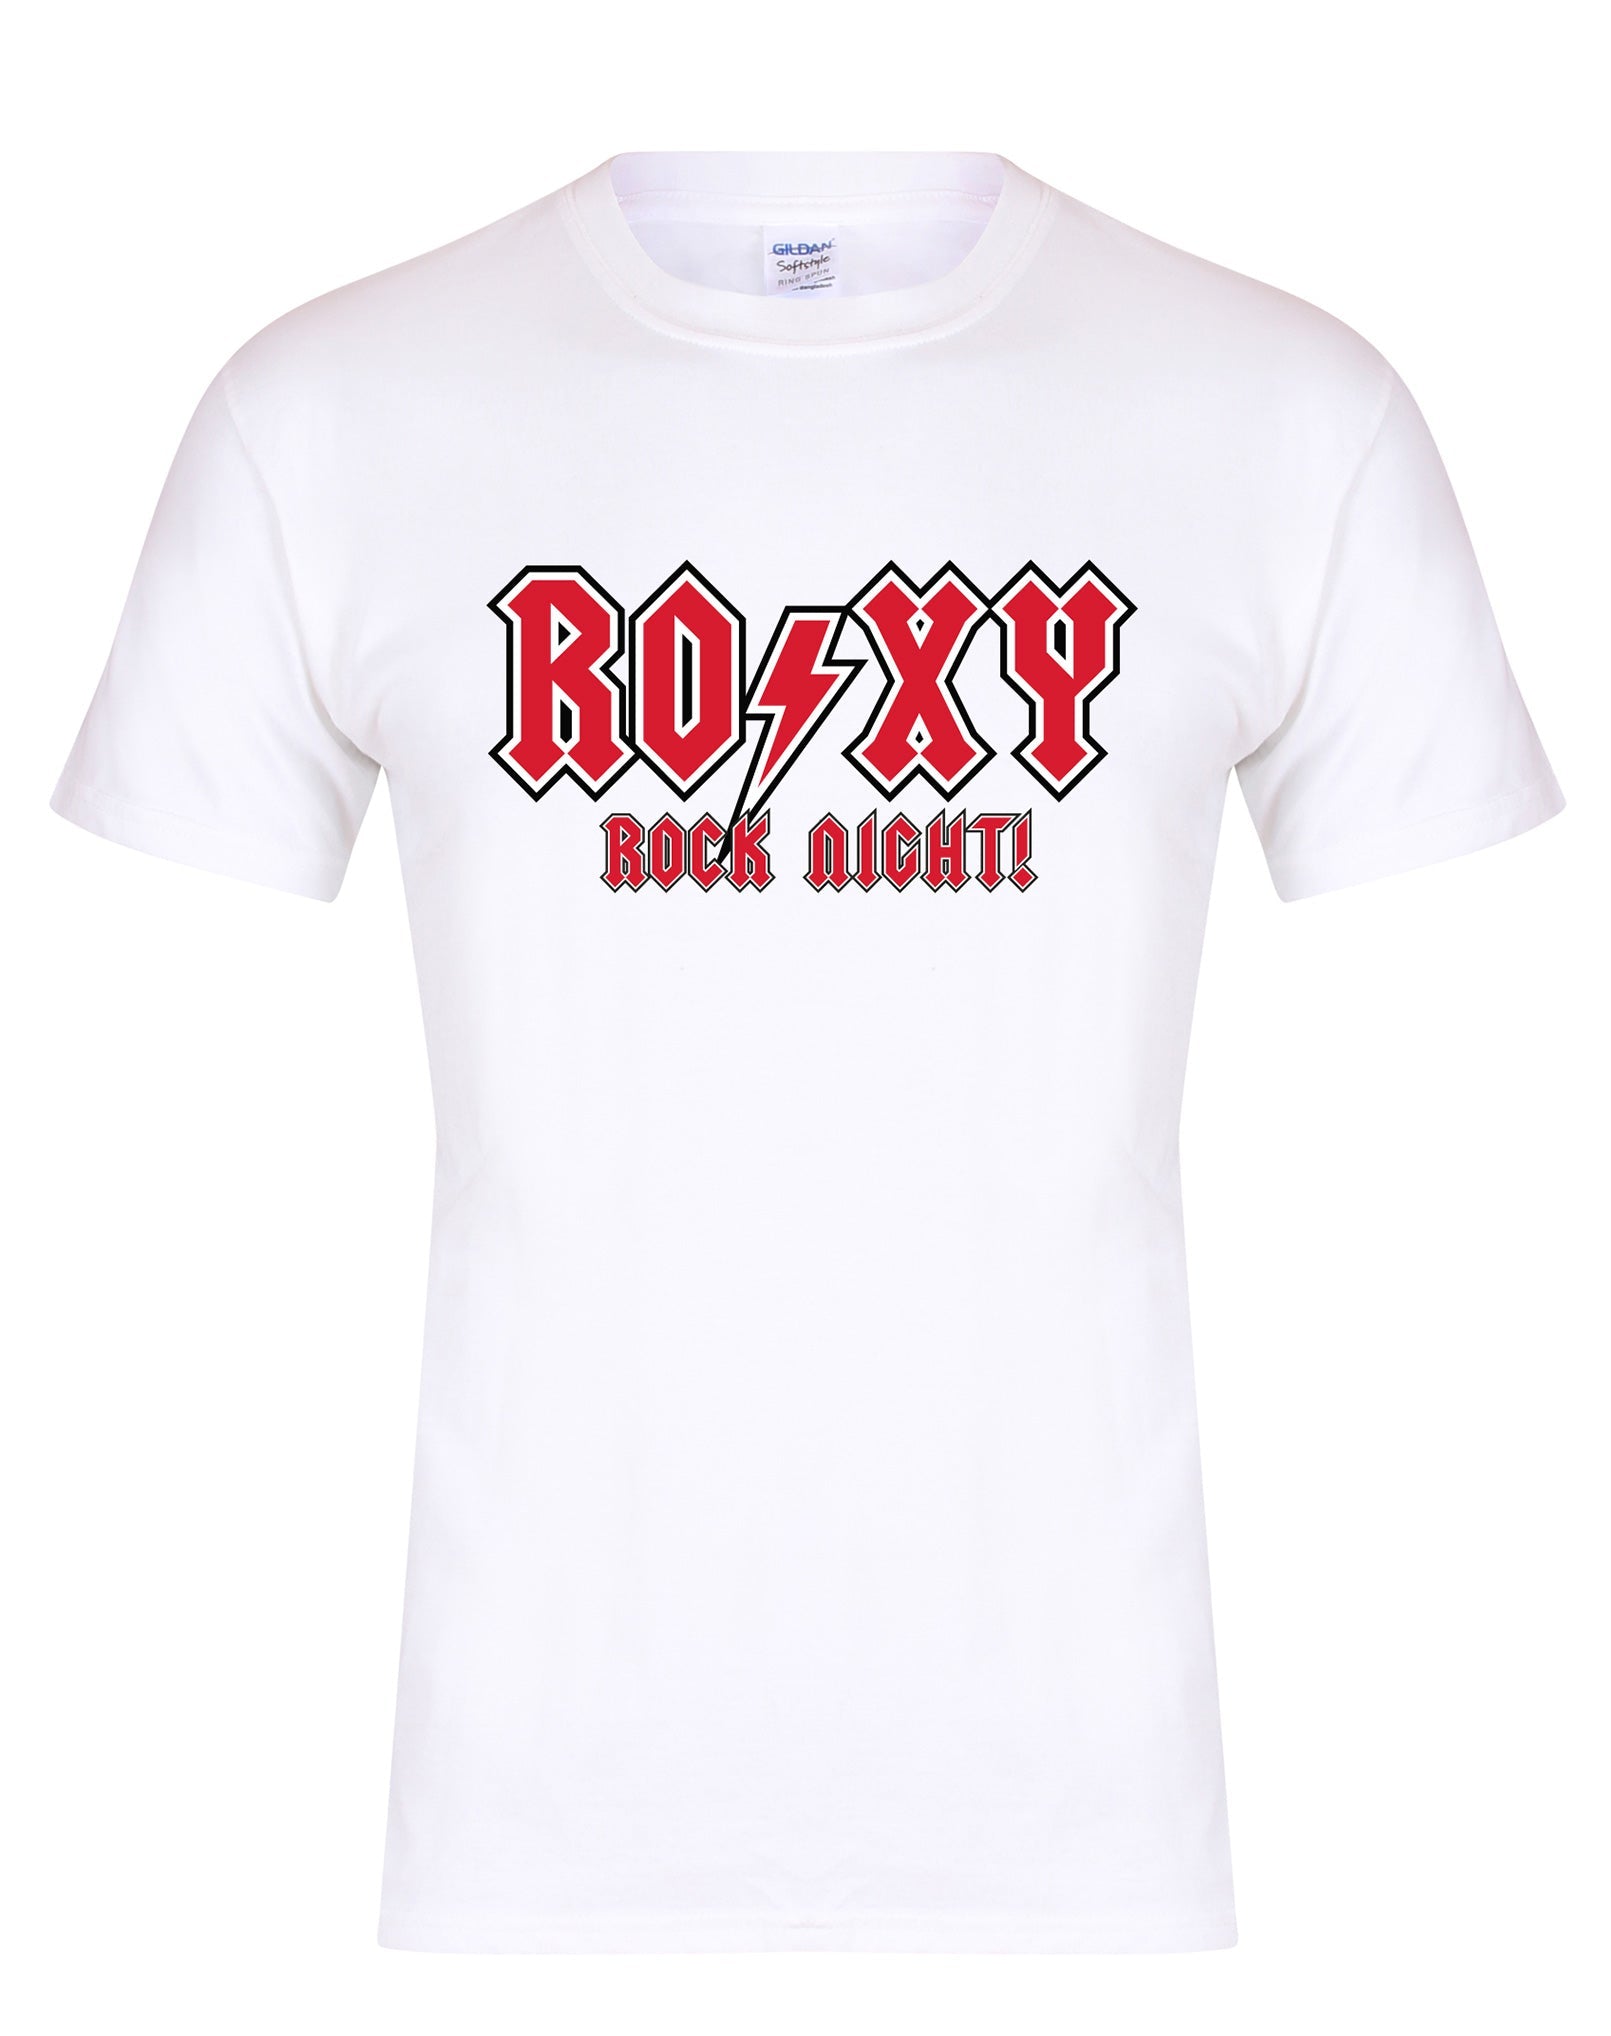 Roxy Rock Night unisex fit T-shirt - various colours - Dirty Stop Outs